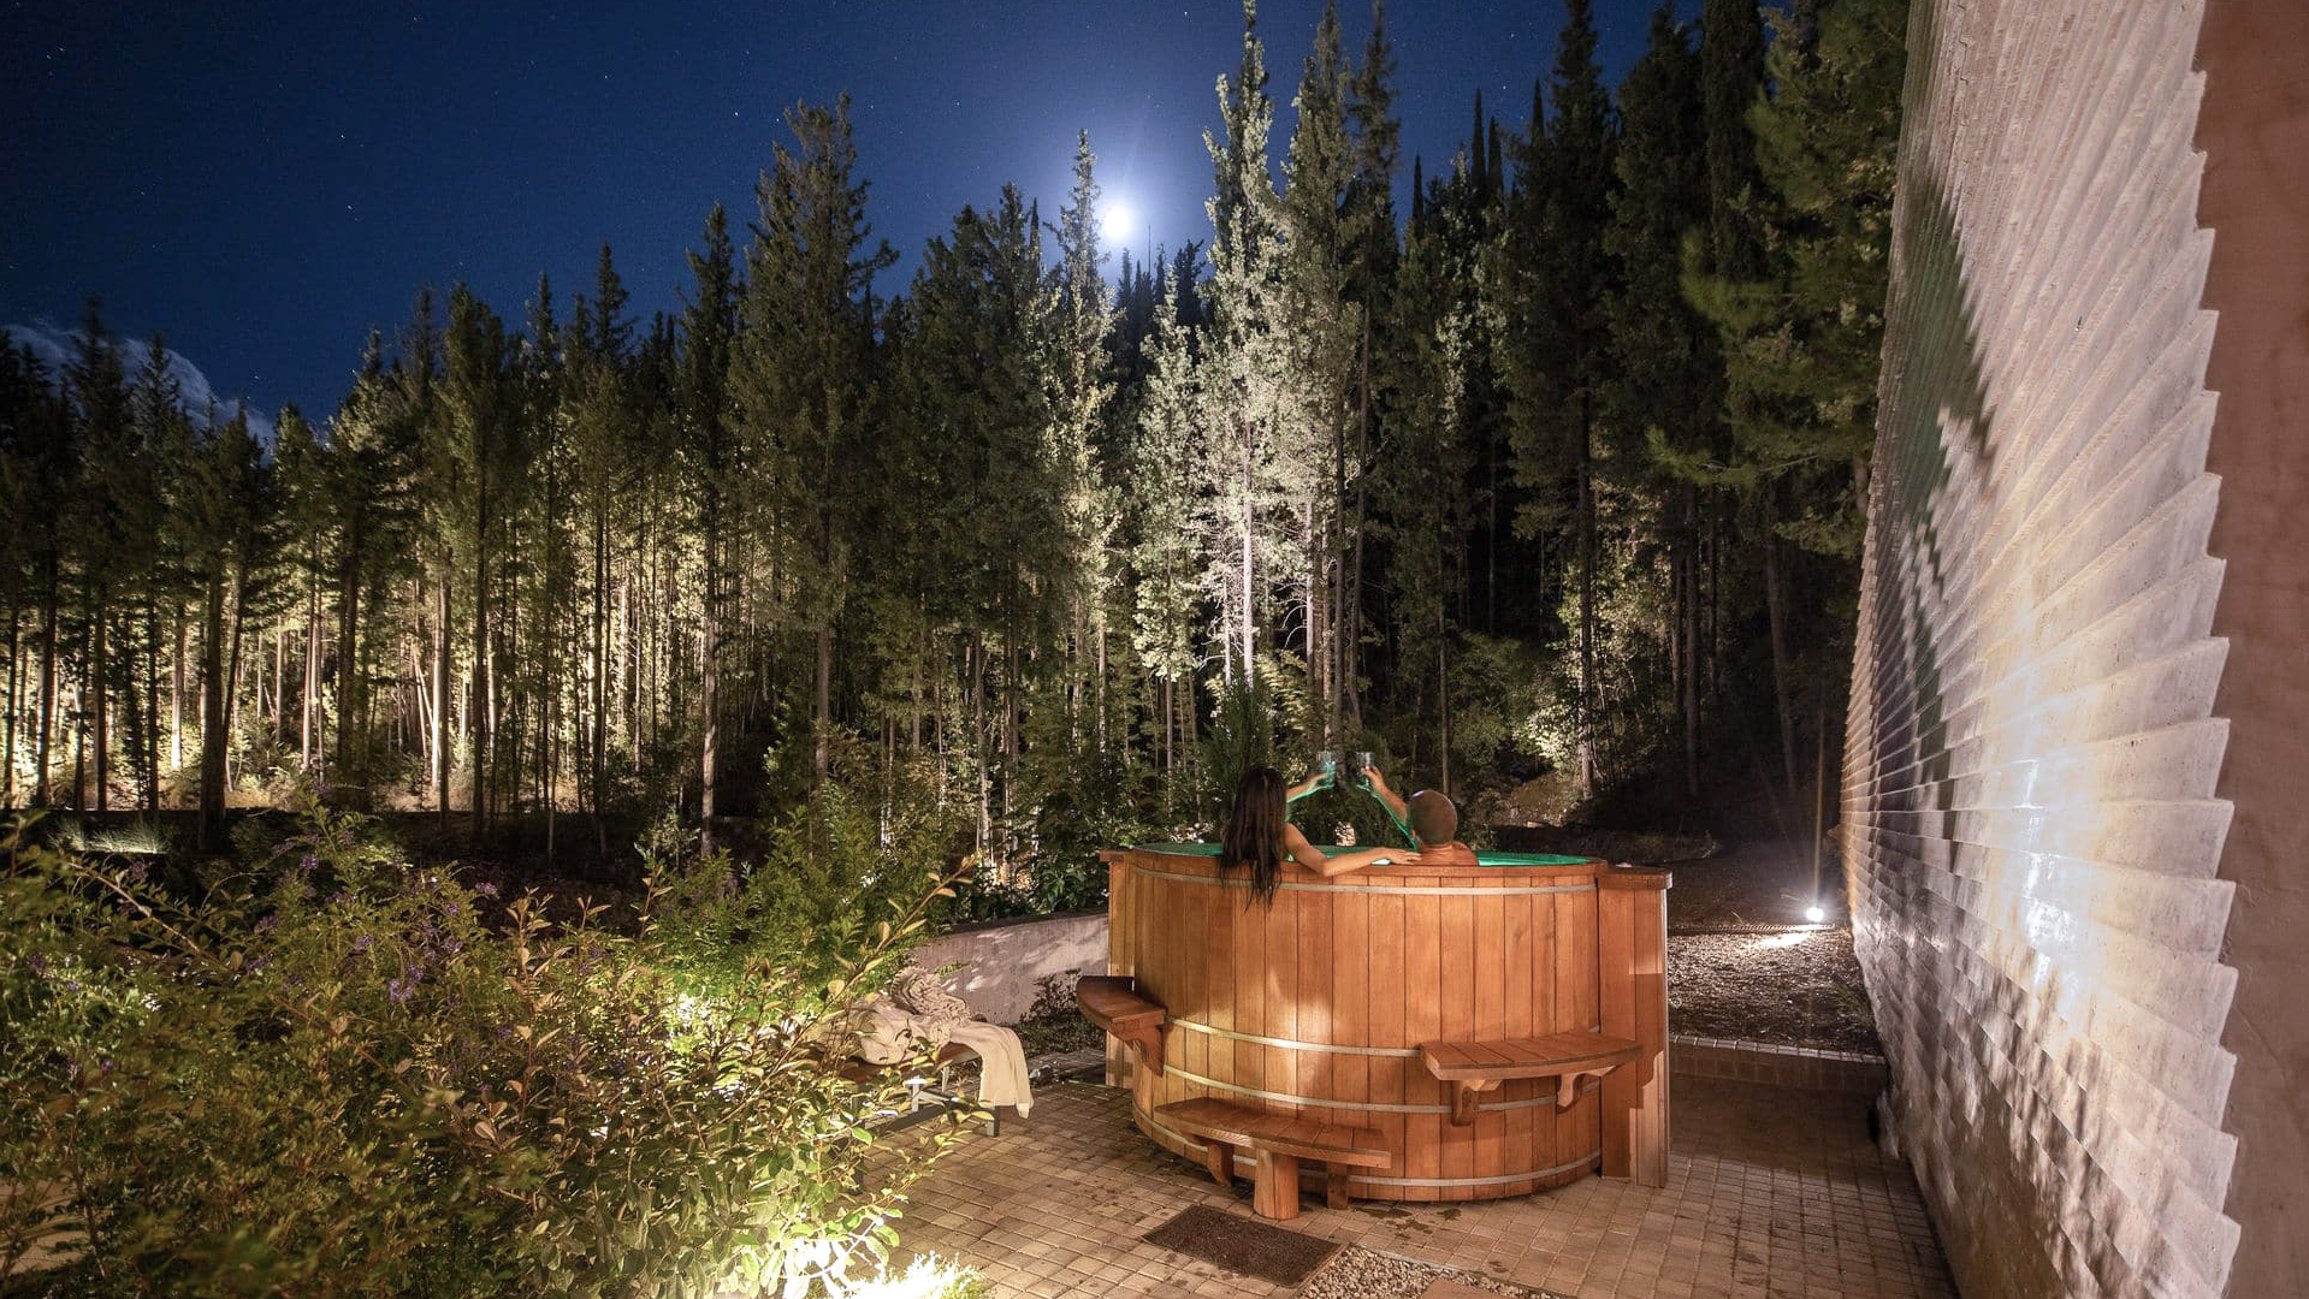 Calofornia Hot Tub for Couples with Forest View.jpg